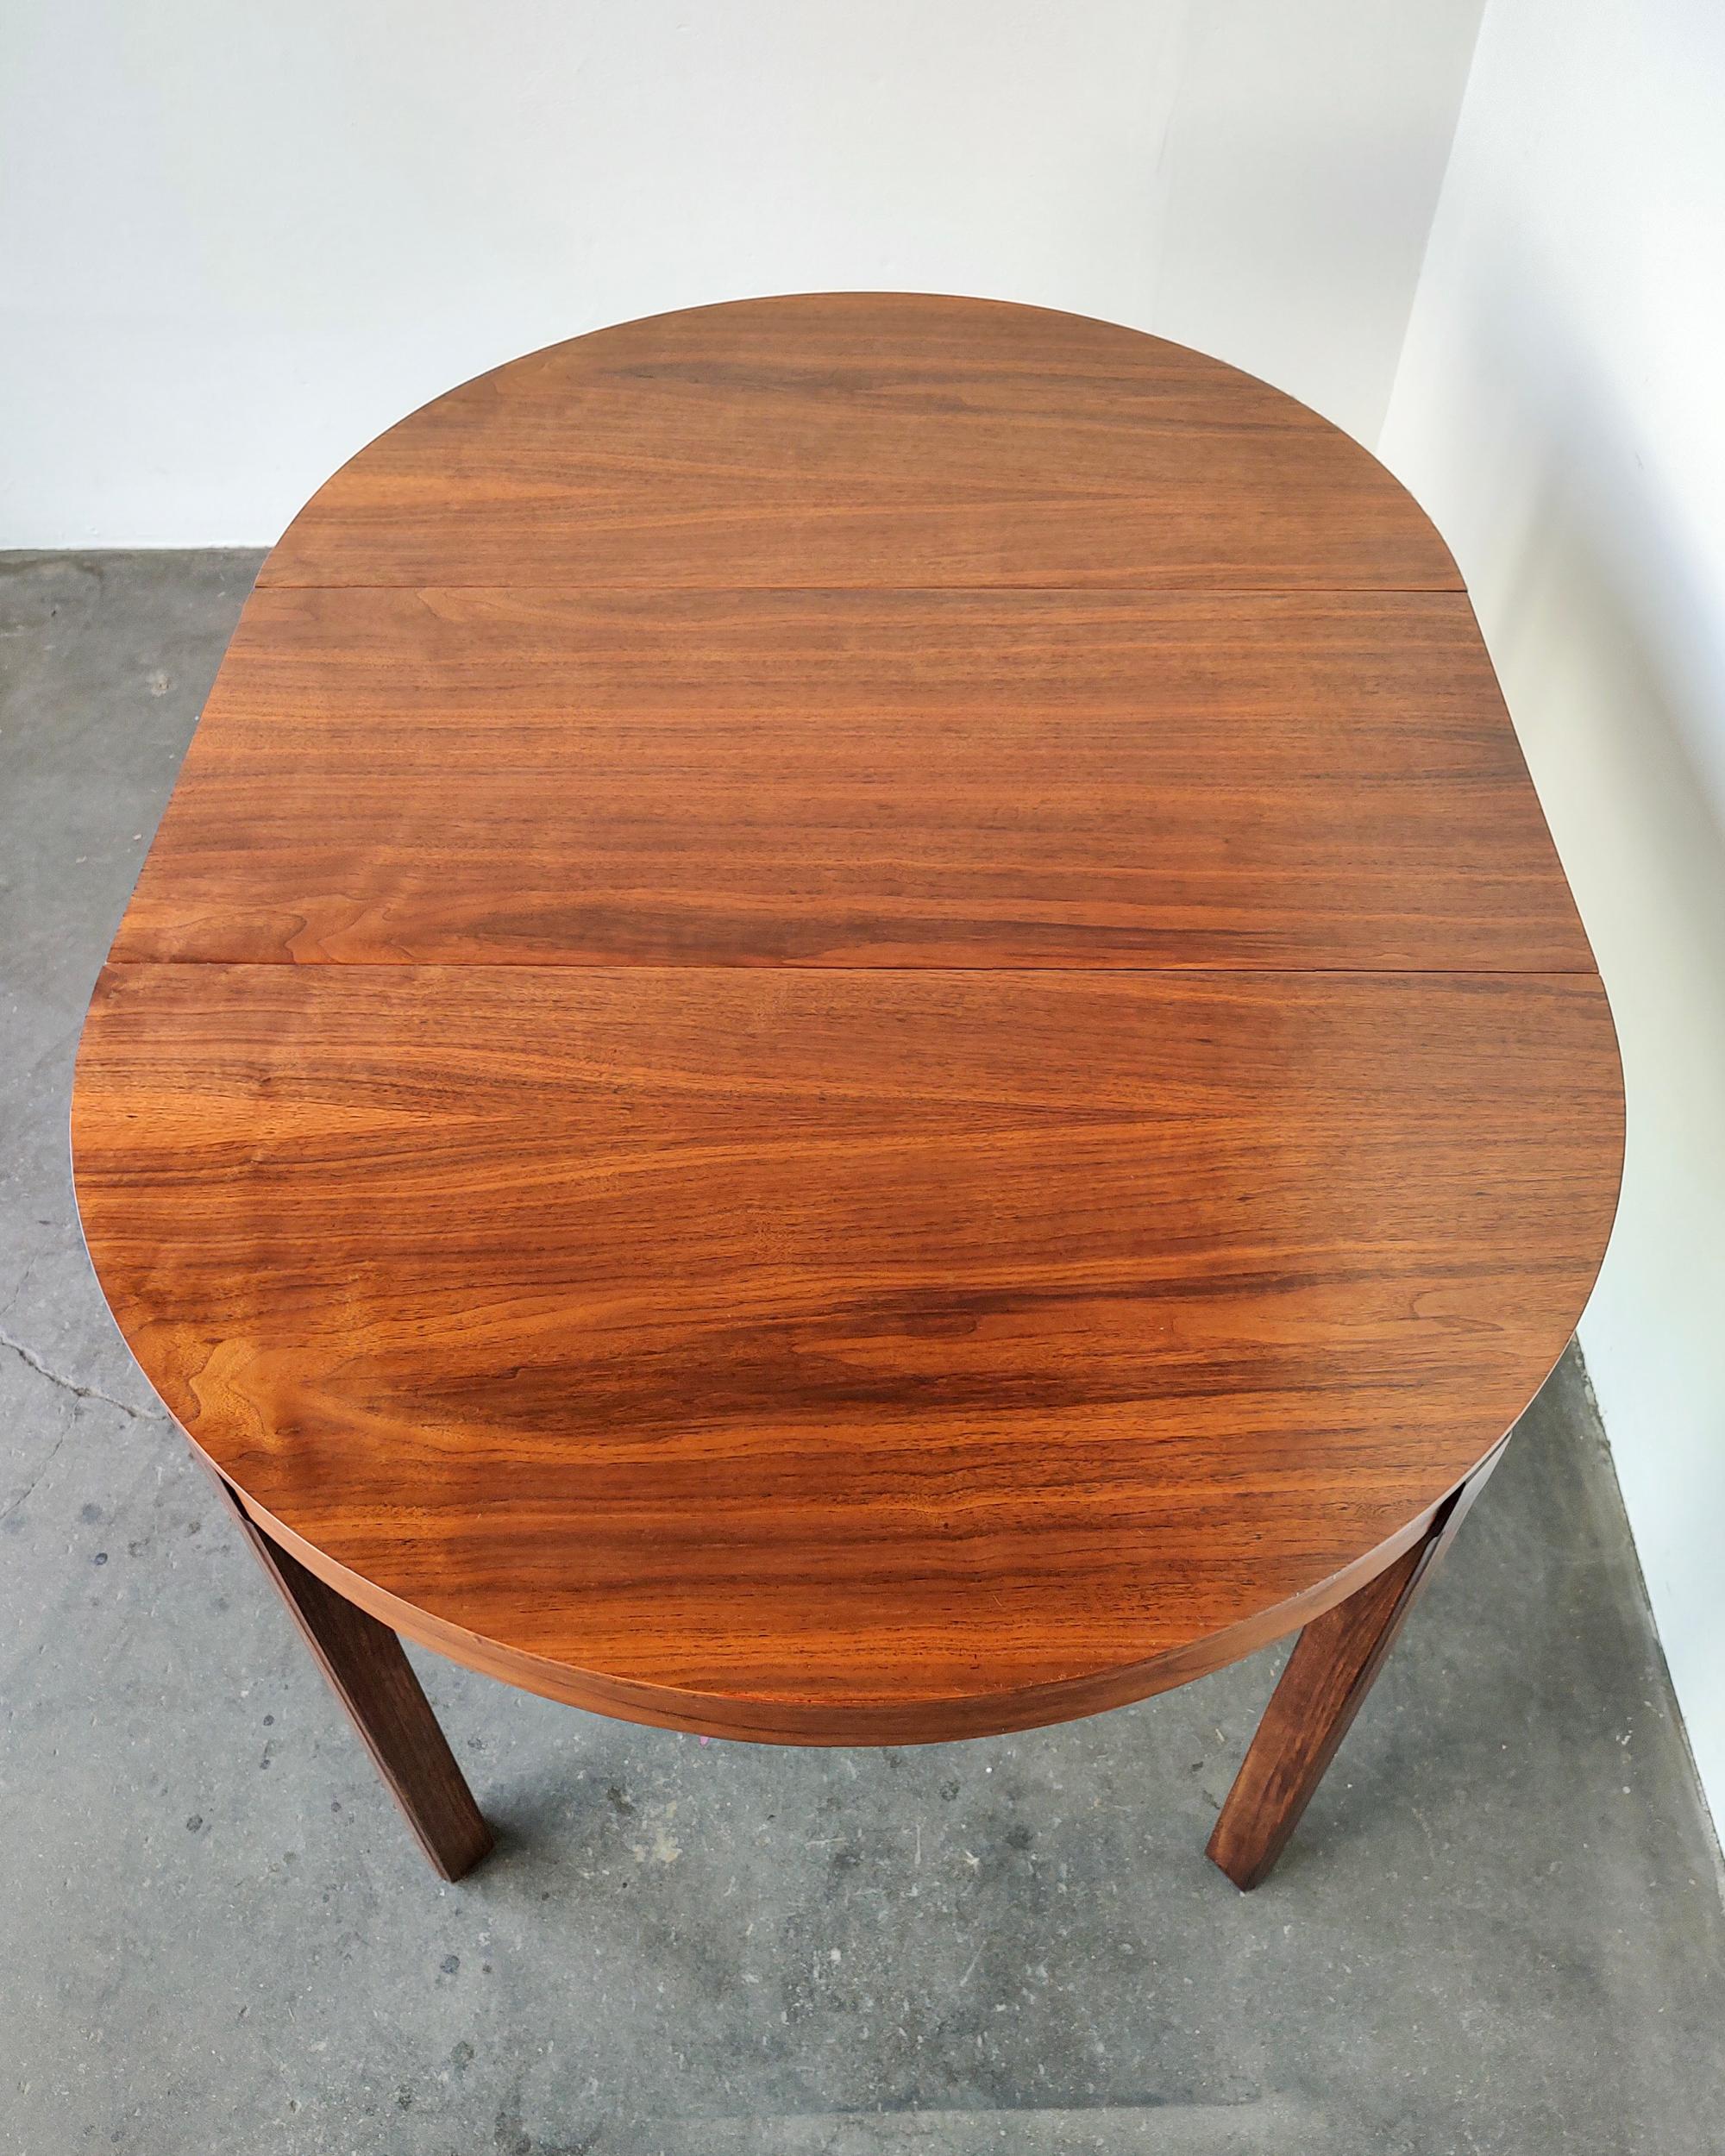 20th Century Mid-Century Modern Walnut Wood Round to Oval Expanding Dining Table 1960s For Sale